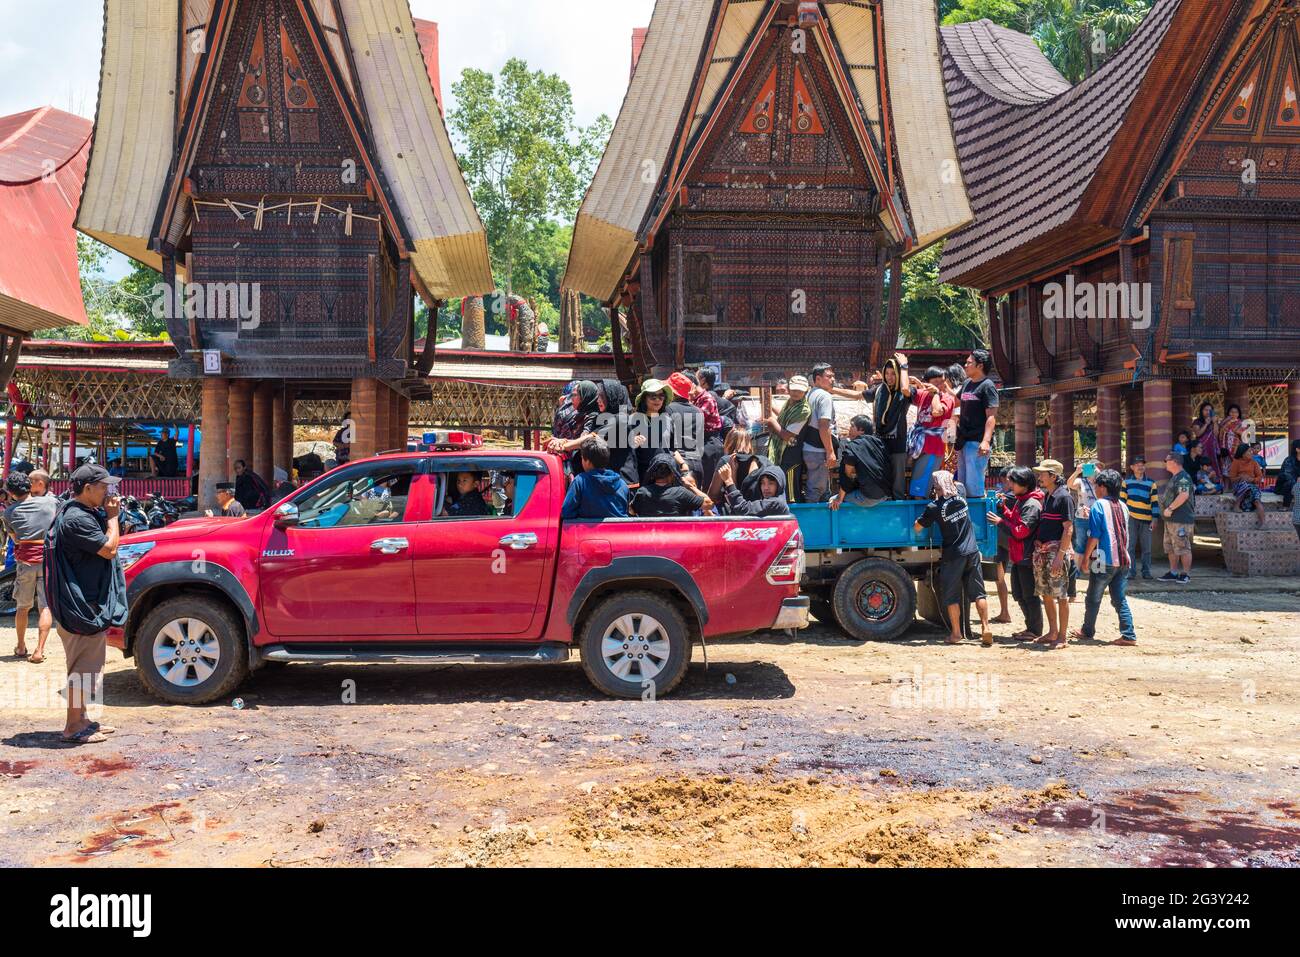 Start of the funeral after the festivities in Tana Toraja on Sulawesi Stock Photo